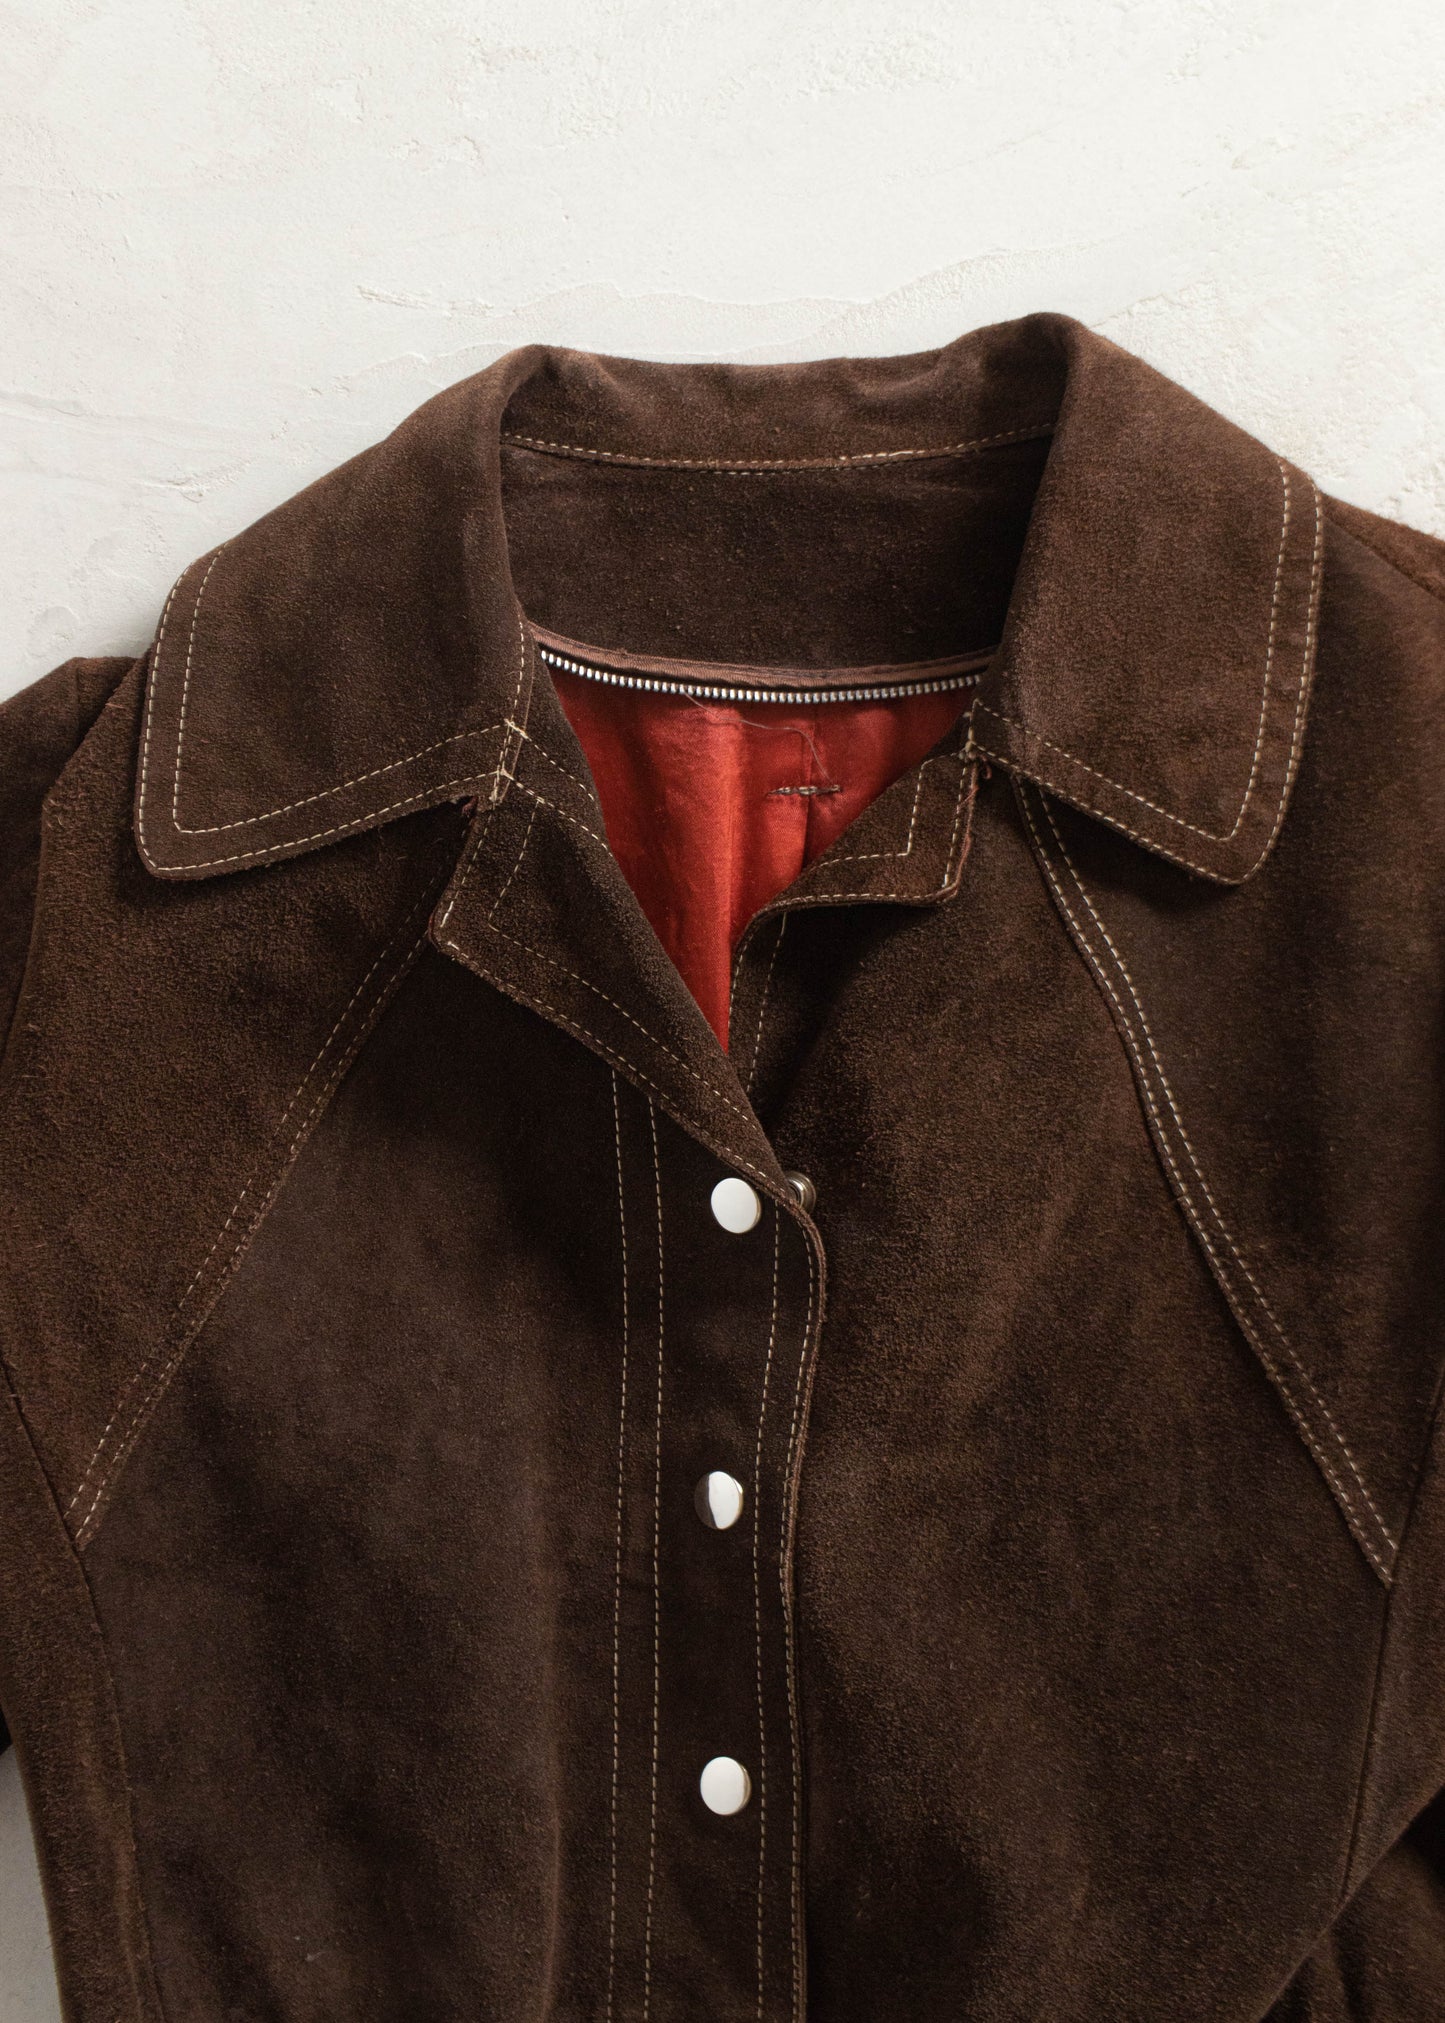 1970s Belted Suede Jacket Size XS/S